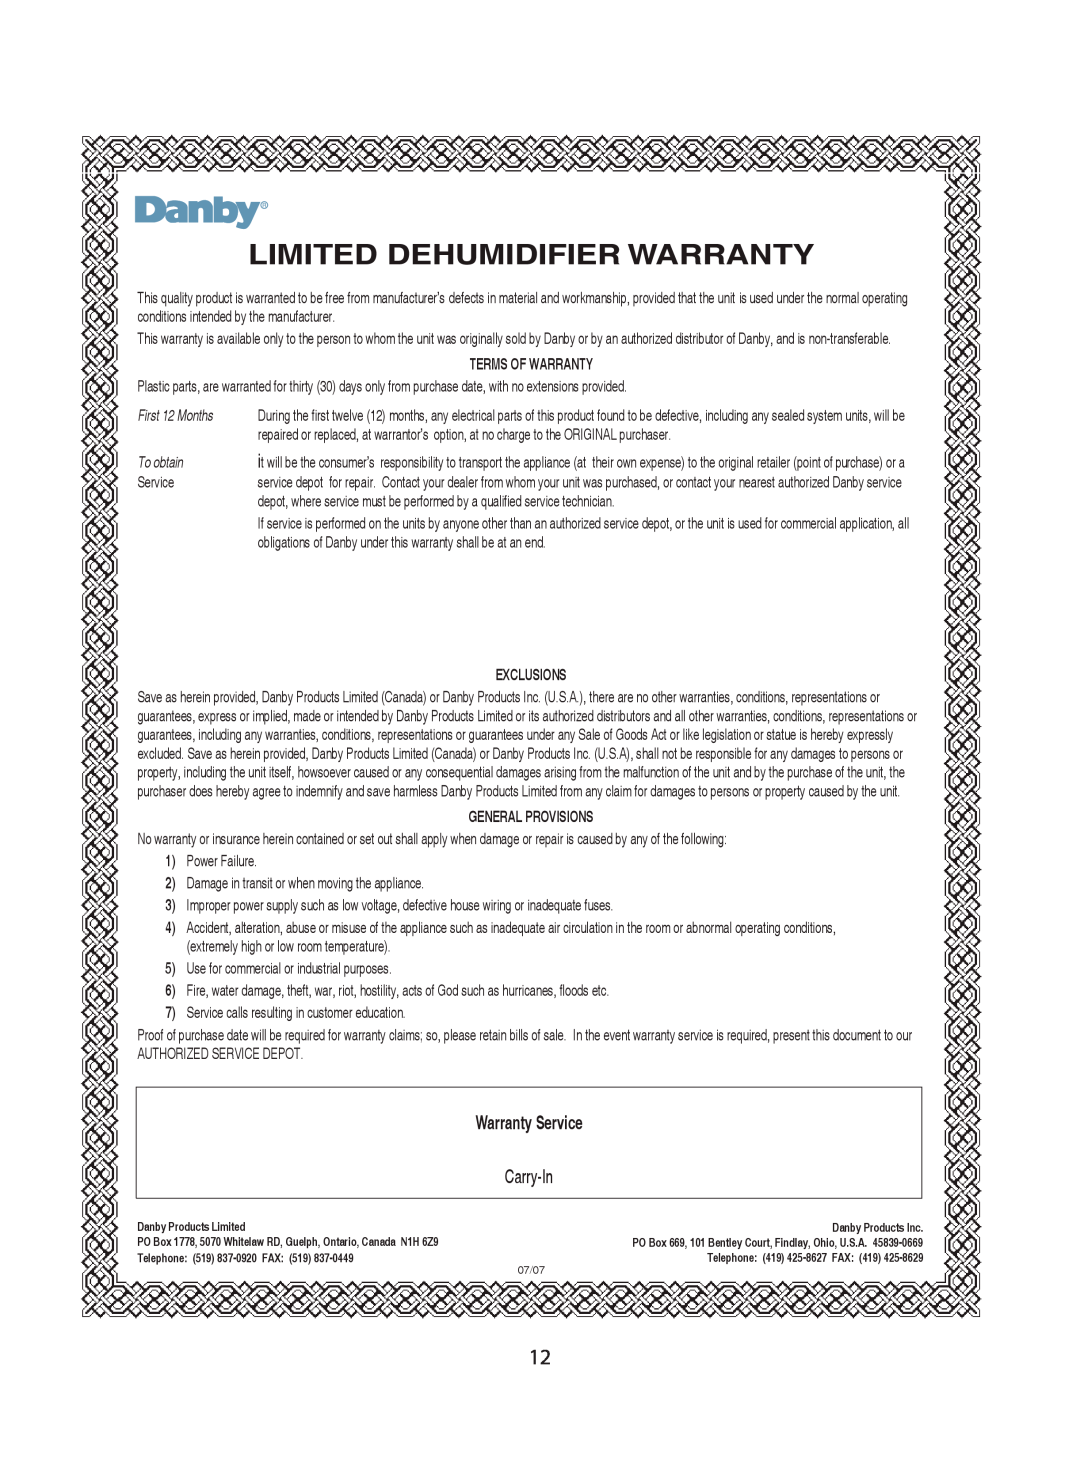 Danby DDR3008EE Limited Dehumidifier Warranty, Carry-In, Terms Of Warranty, First 12 Months, To obtain, Exclusions 